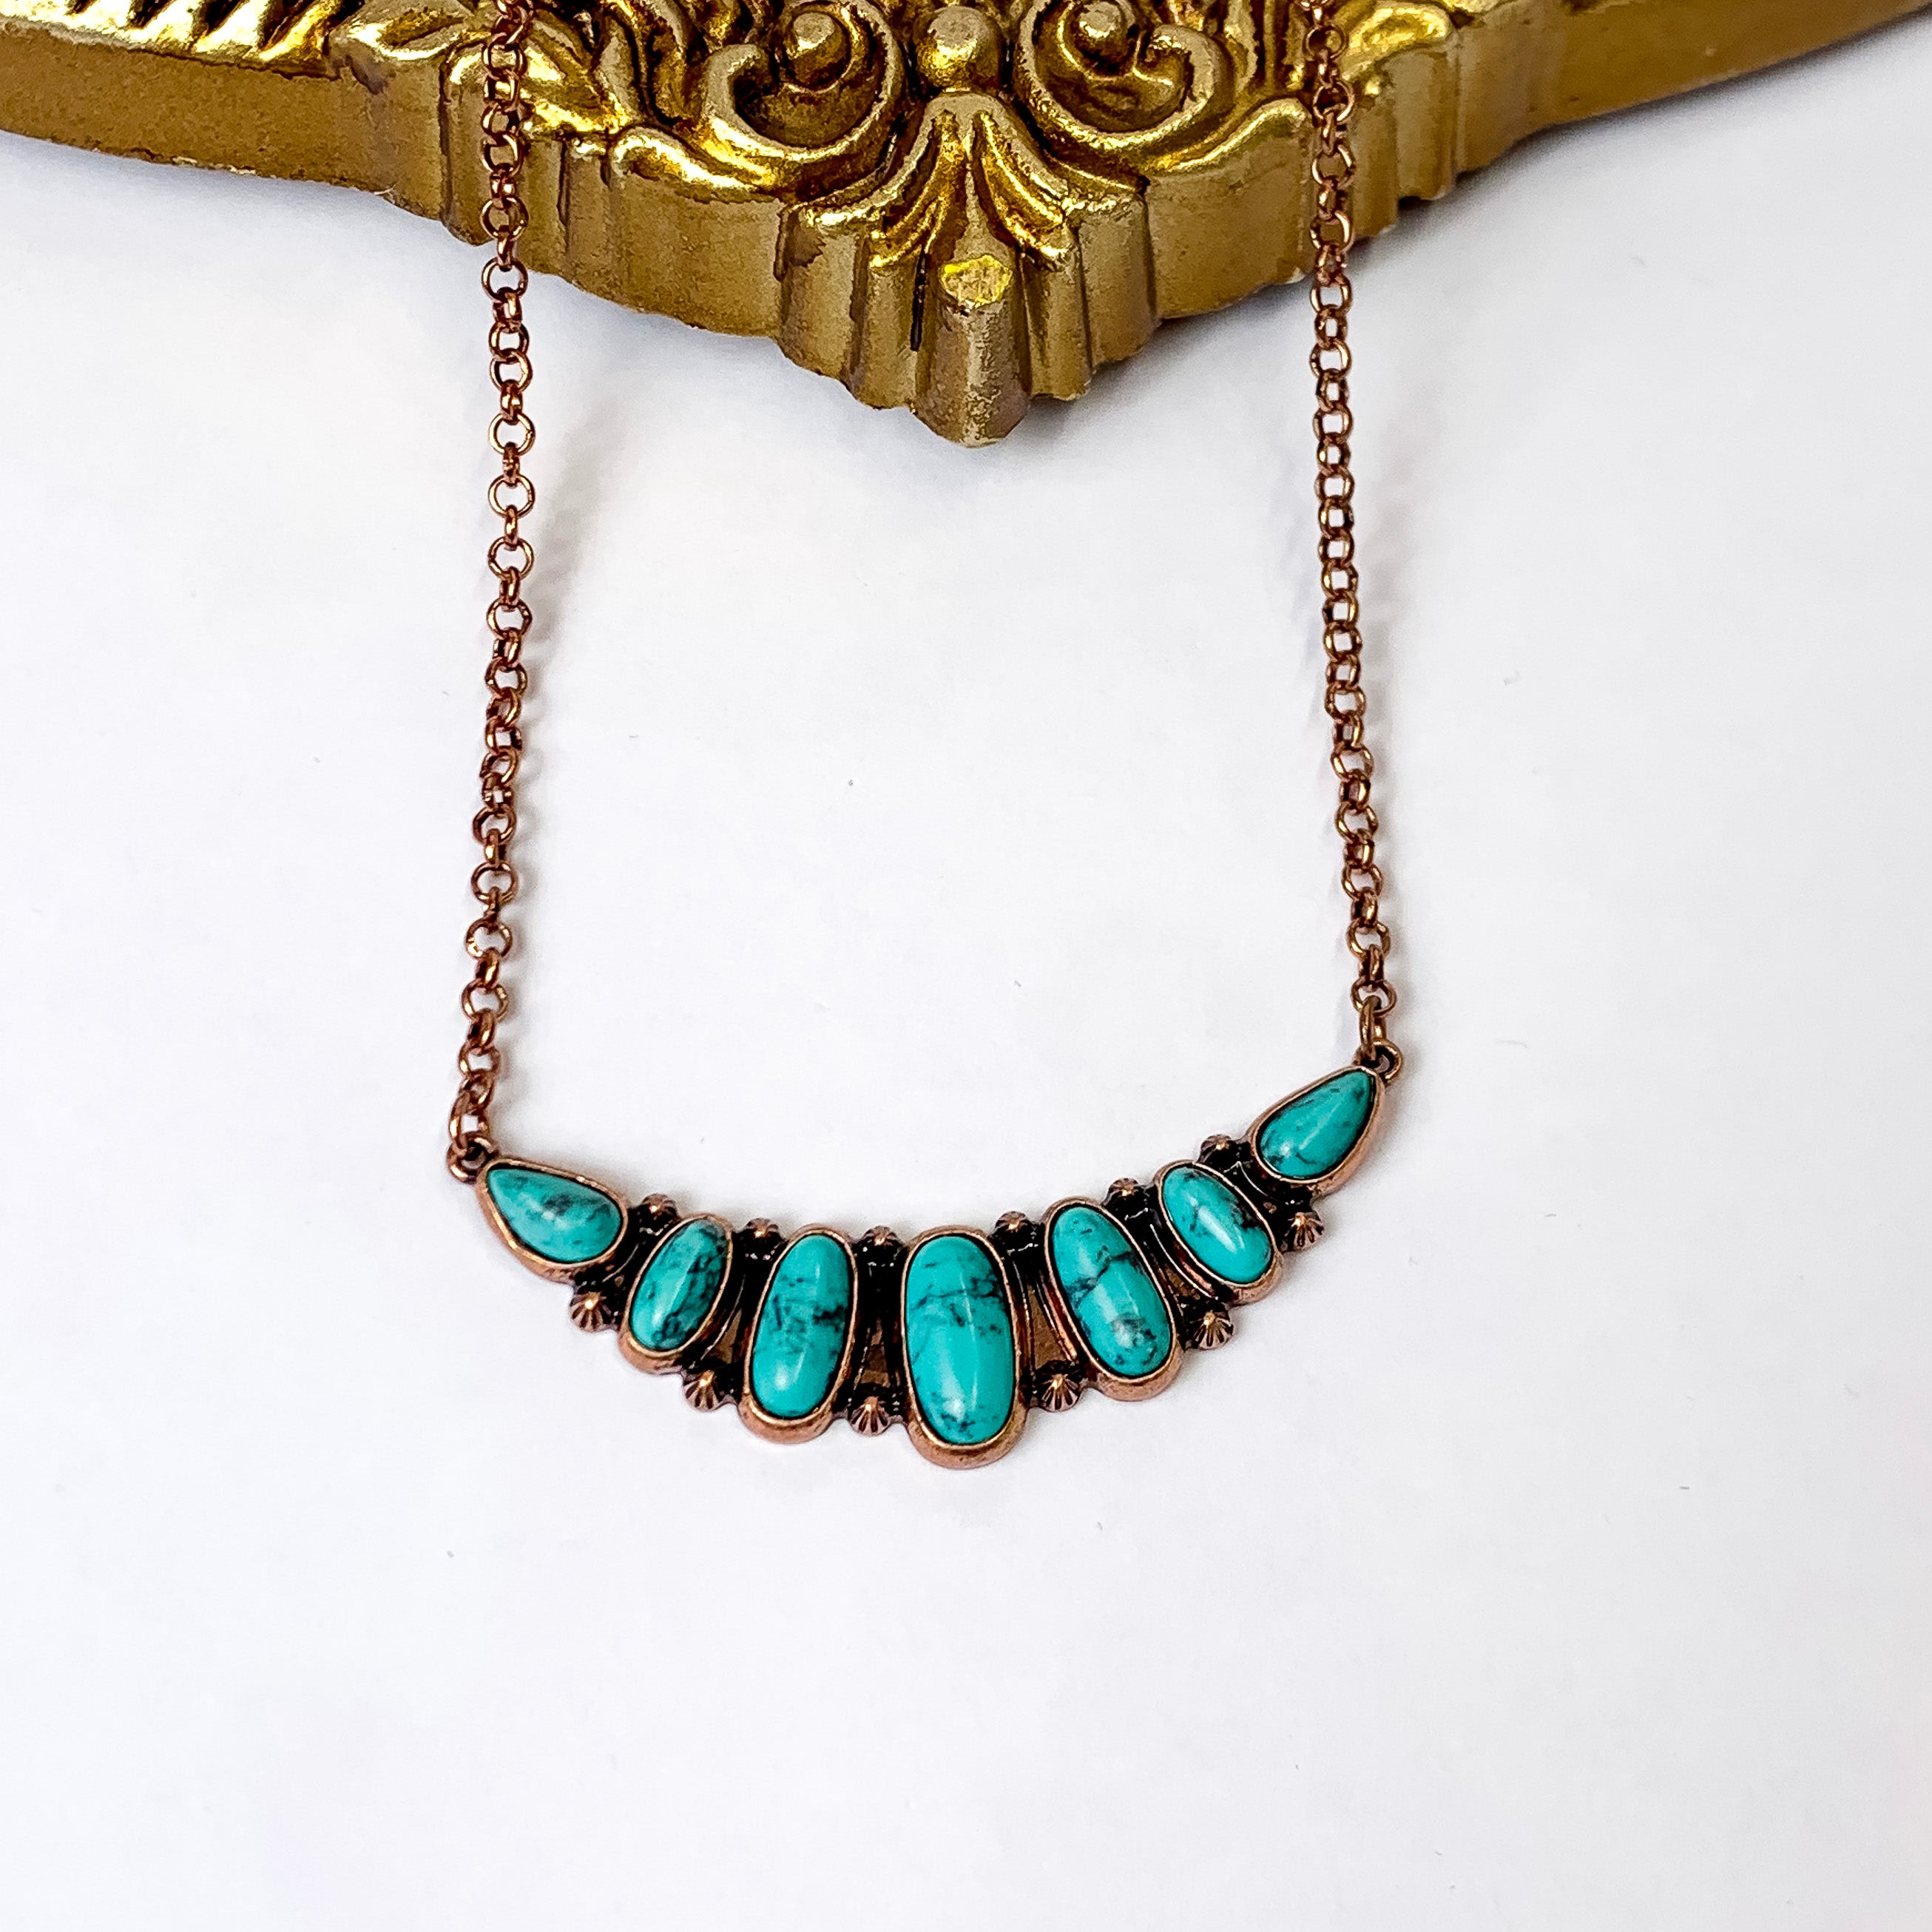 Copper Tone Chain Necklace with Faux Turquoise Stone Pendant - Giddy Up Glamour Boutique